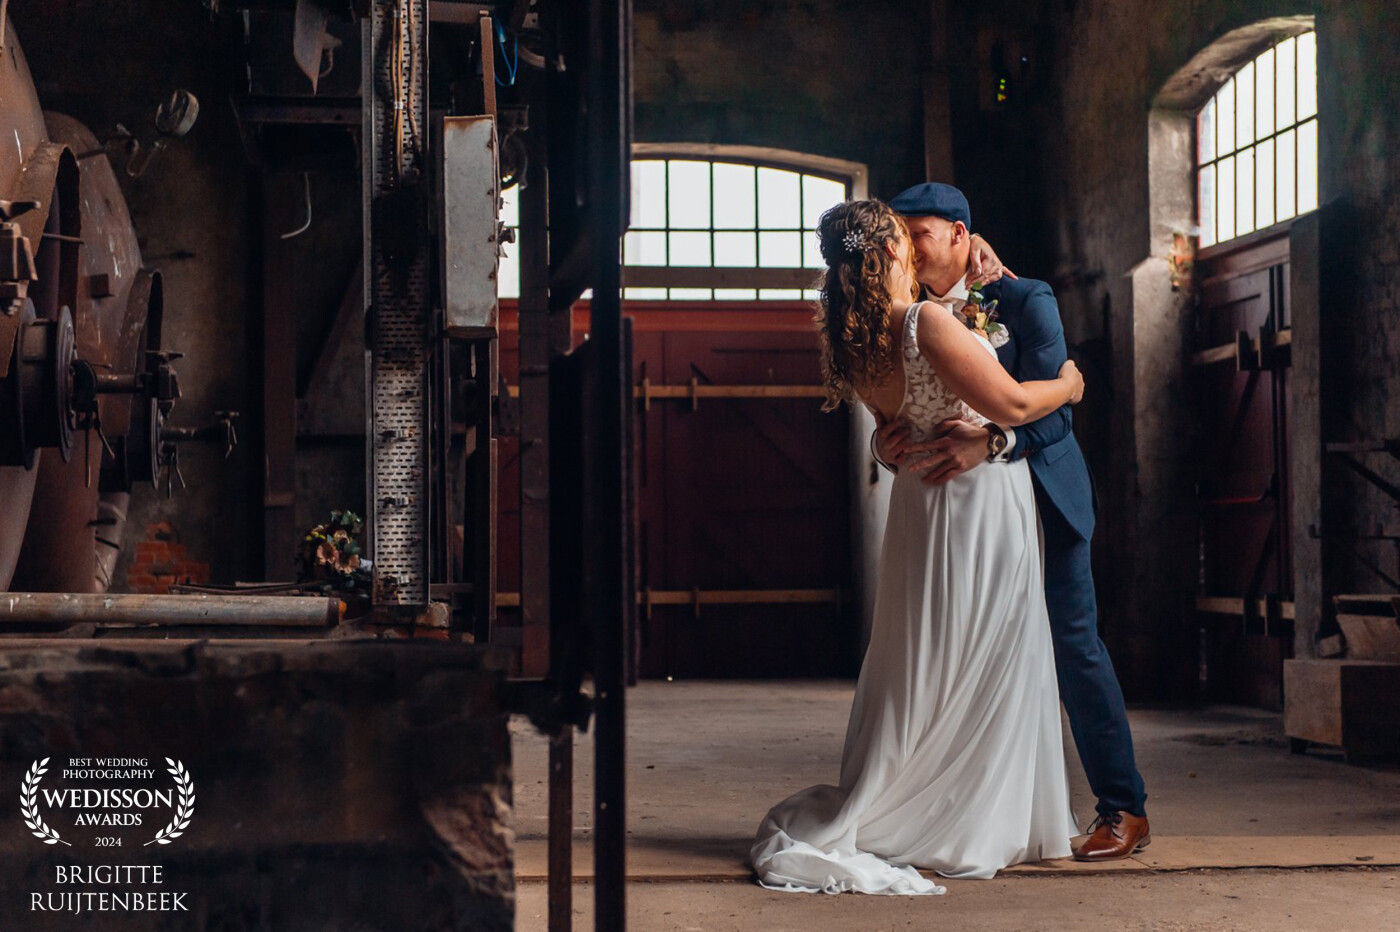 "The first look took place in the old cardboard factory; what a beautiful backdrop for the Peaky Blinders style of this wonderful wedding."